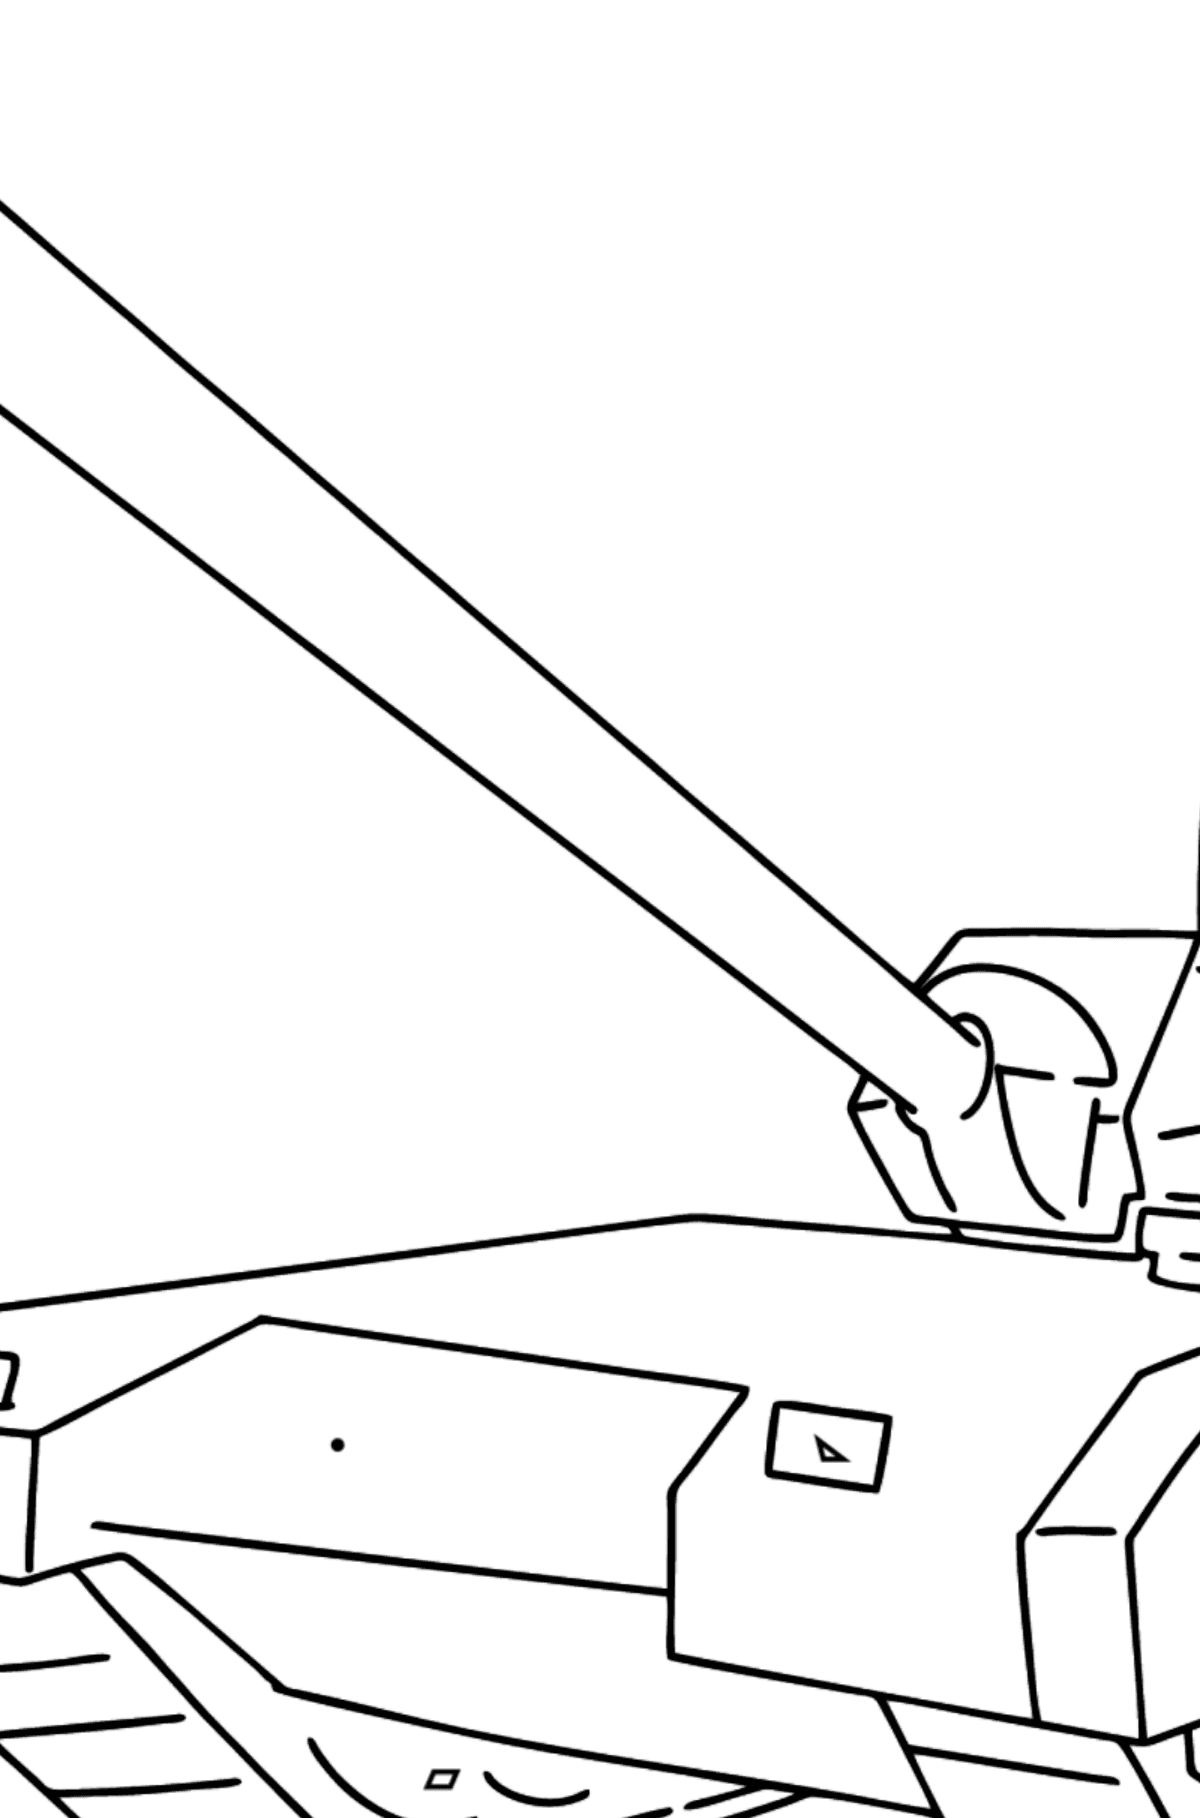 Armata Tank coloring page - Coloring by Symbols and Geometric Shapes for Kids